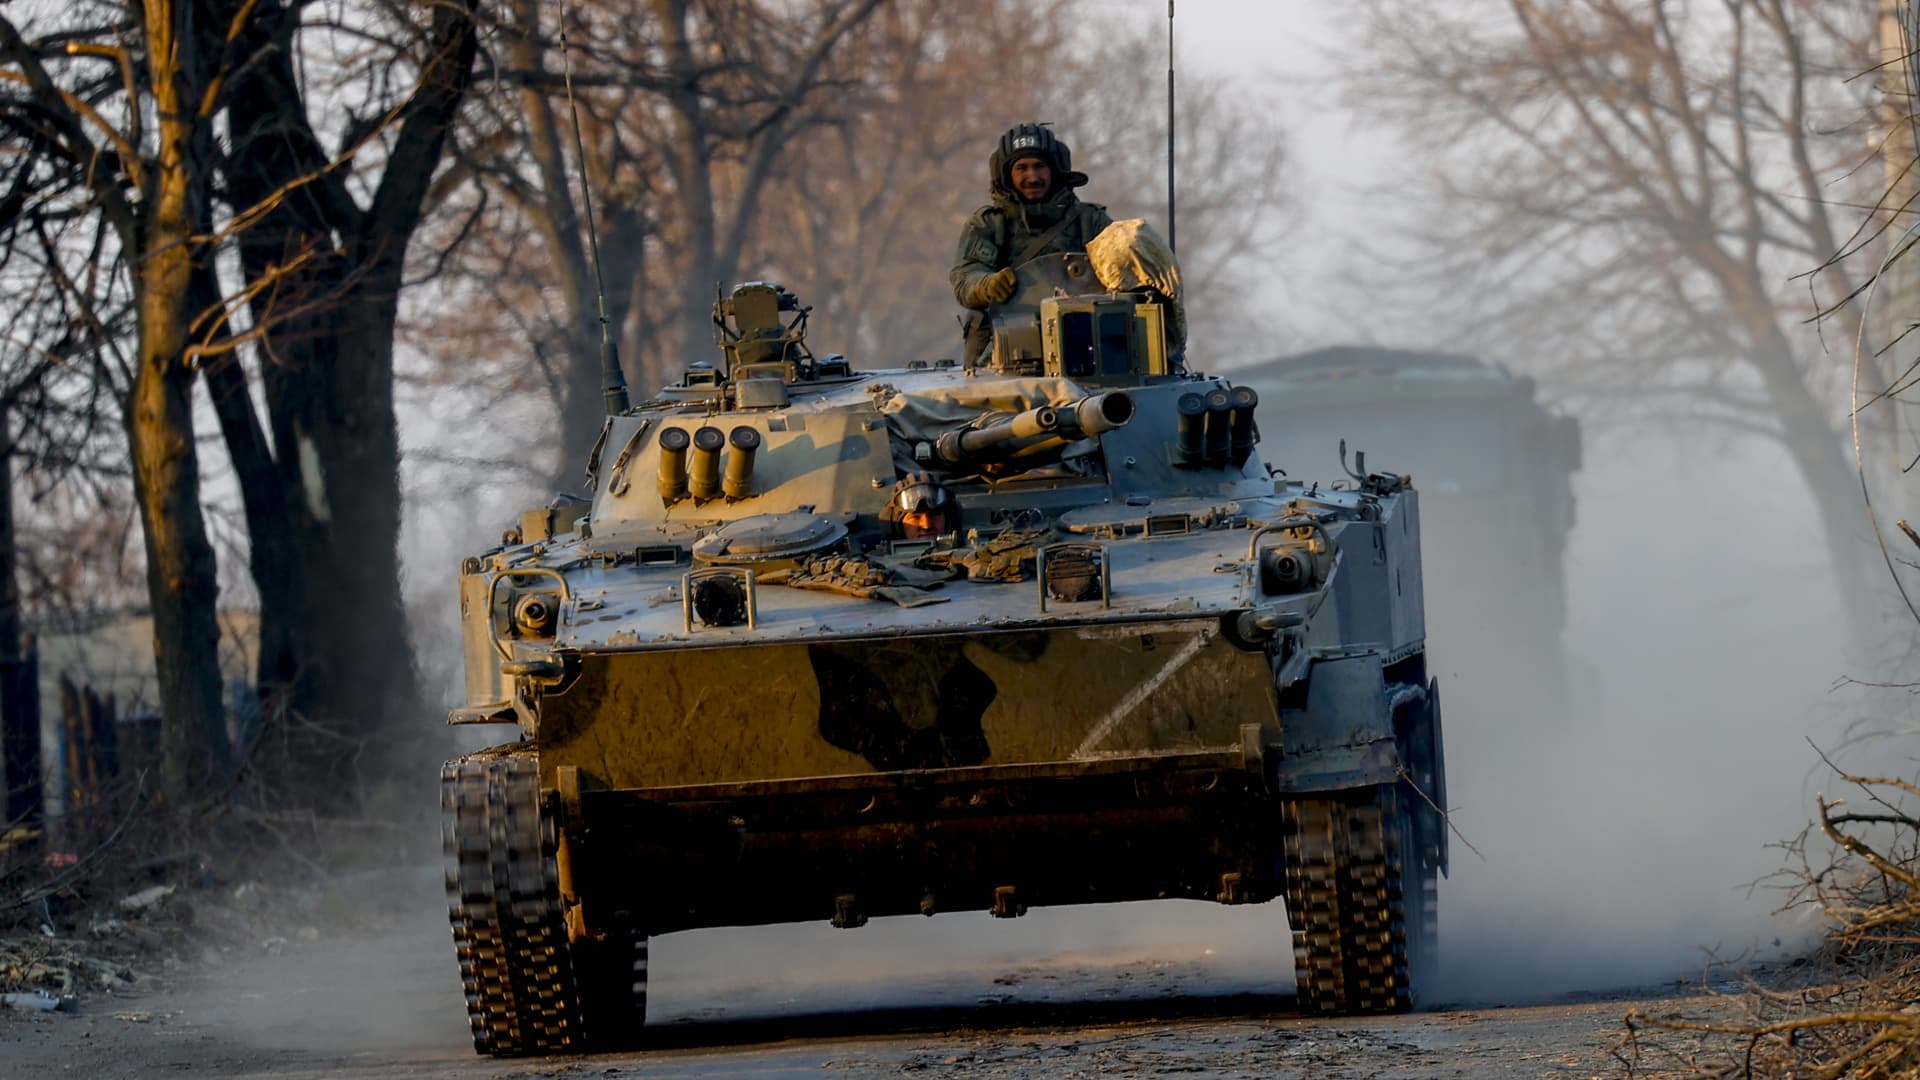 Russian military vehicles patrol in Volnovakha city, one of the cities most affected by the war between Russia and Ukraine that started on February 24, in the Donetsk region of Ukraine, on March 27, 2022.